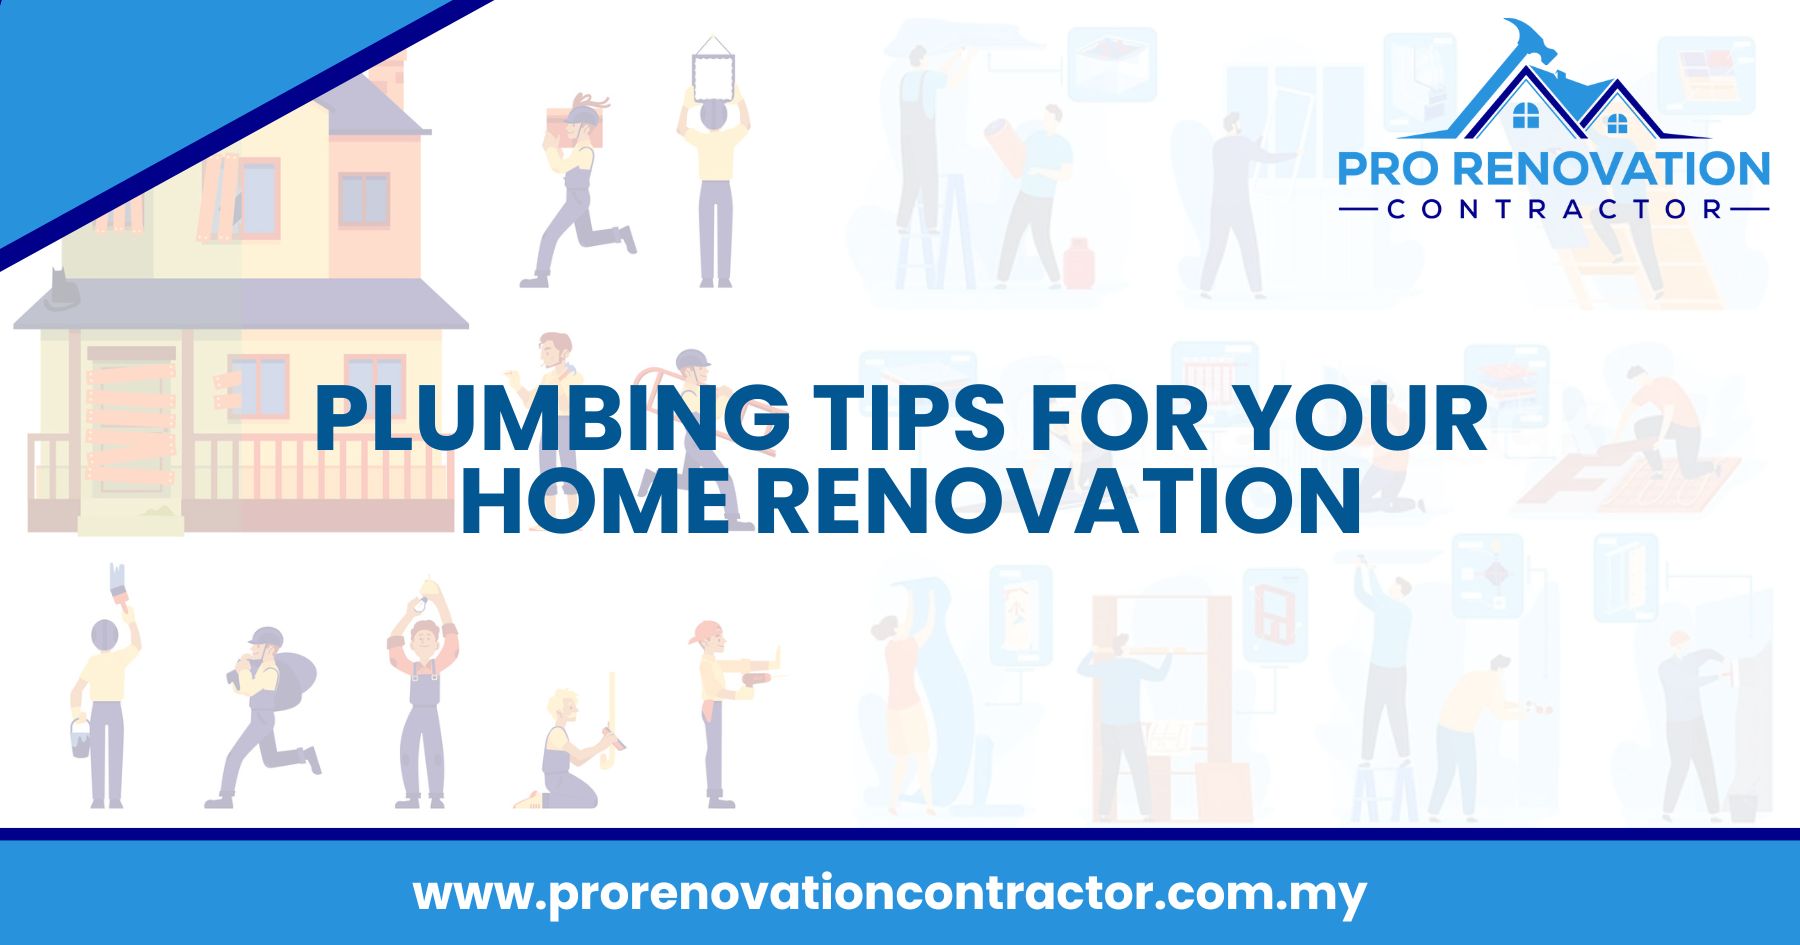 Plumbing Tips for Your Home Renovation